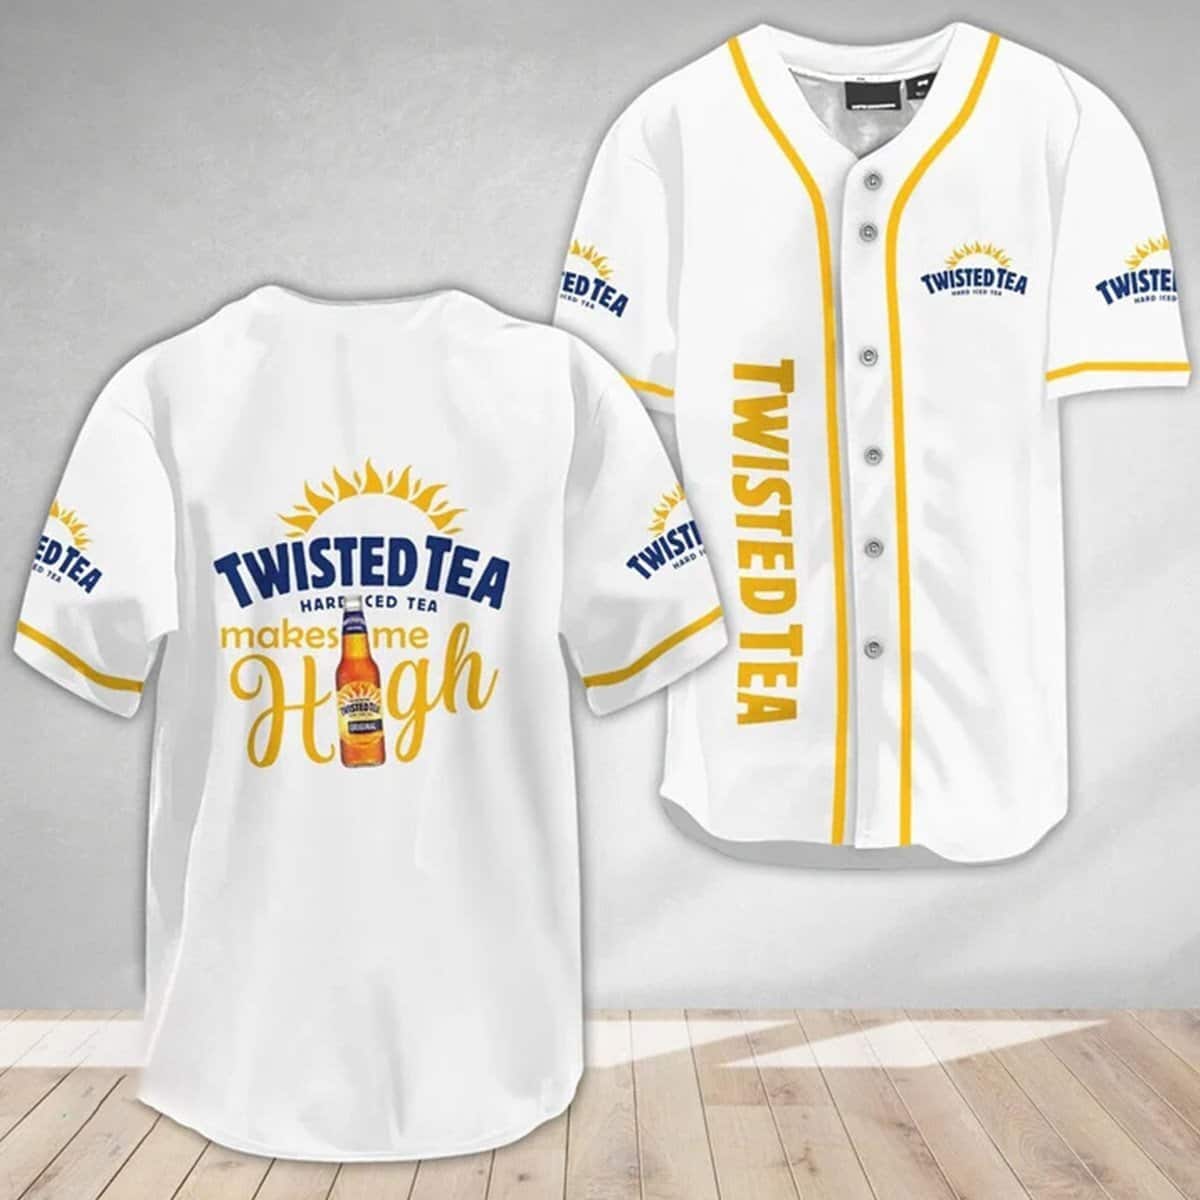 White Twisted Tea Baseball Jersey Hard Iced Tea Makes Me High Gift For New Dad